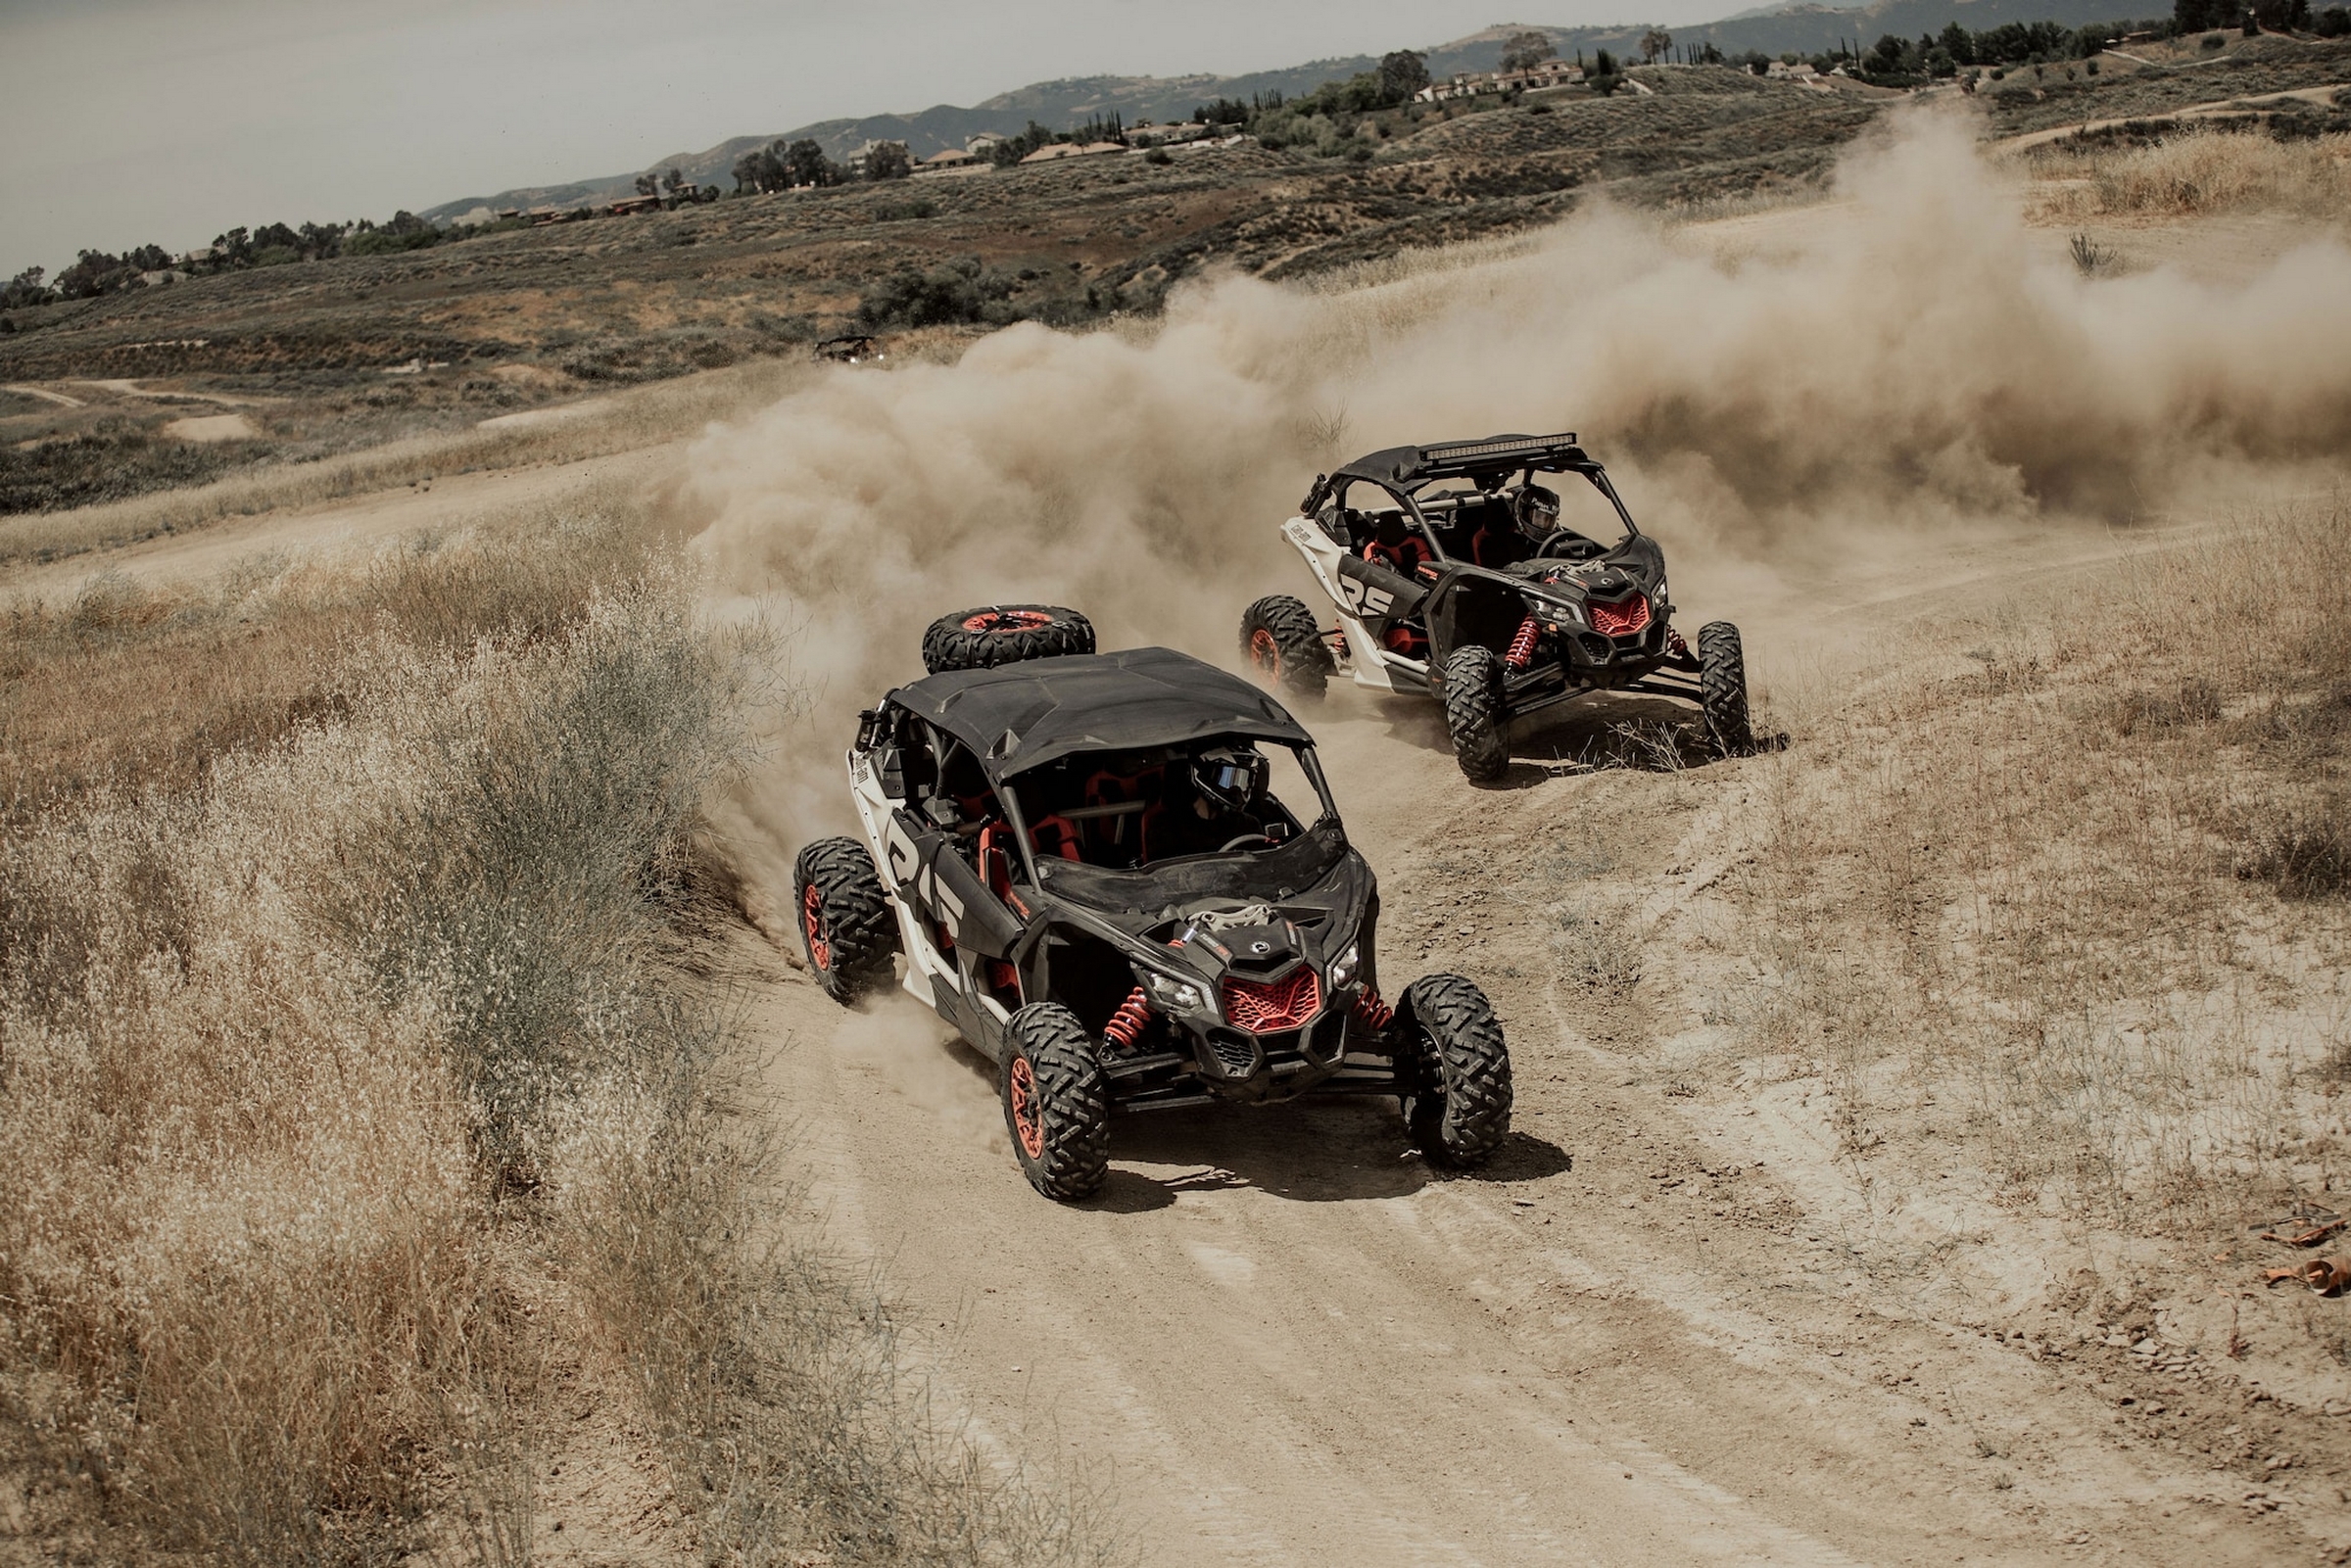 Can-Am Maverick X3 X-RS 2021|Quad Can-Am 2021|Can-Am Defender 2021|Can-Am Outlander 2021|Can-Am Maverick X3 2021|Can-Am Maverick Sport 2021|Can-Am Maverick Trail 2021|Can-Am Defender 2021|Can-Am Outlander 450 570|Can-Am Outlander 2021|Can-Am Renegade 2021|Can-Am DS 2021